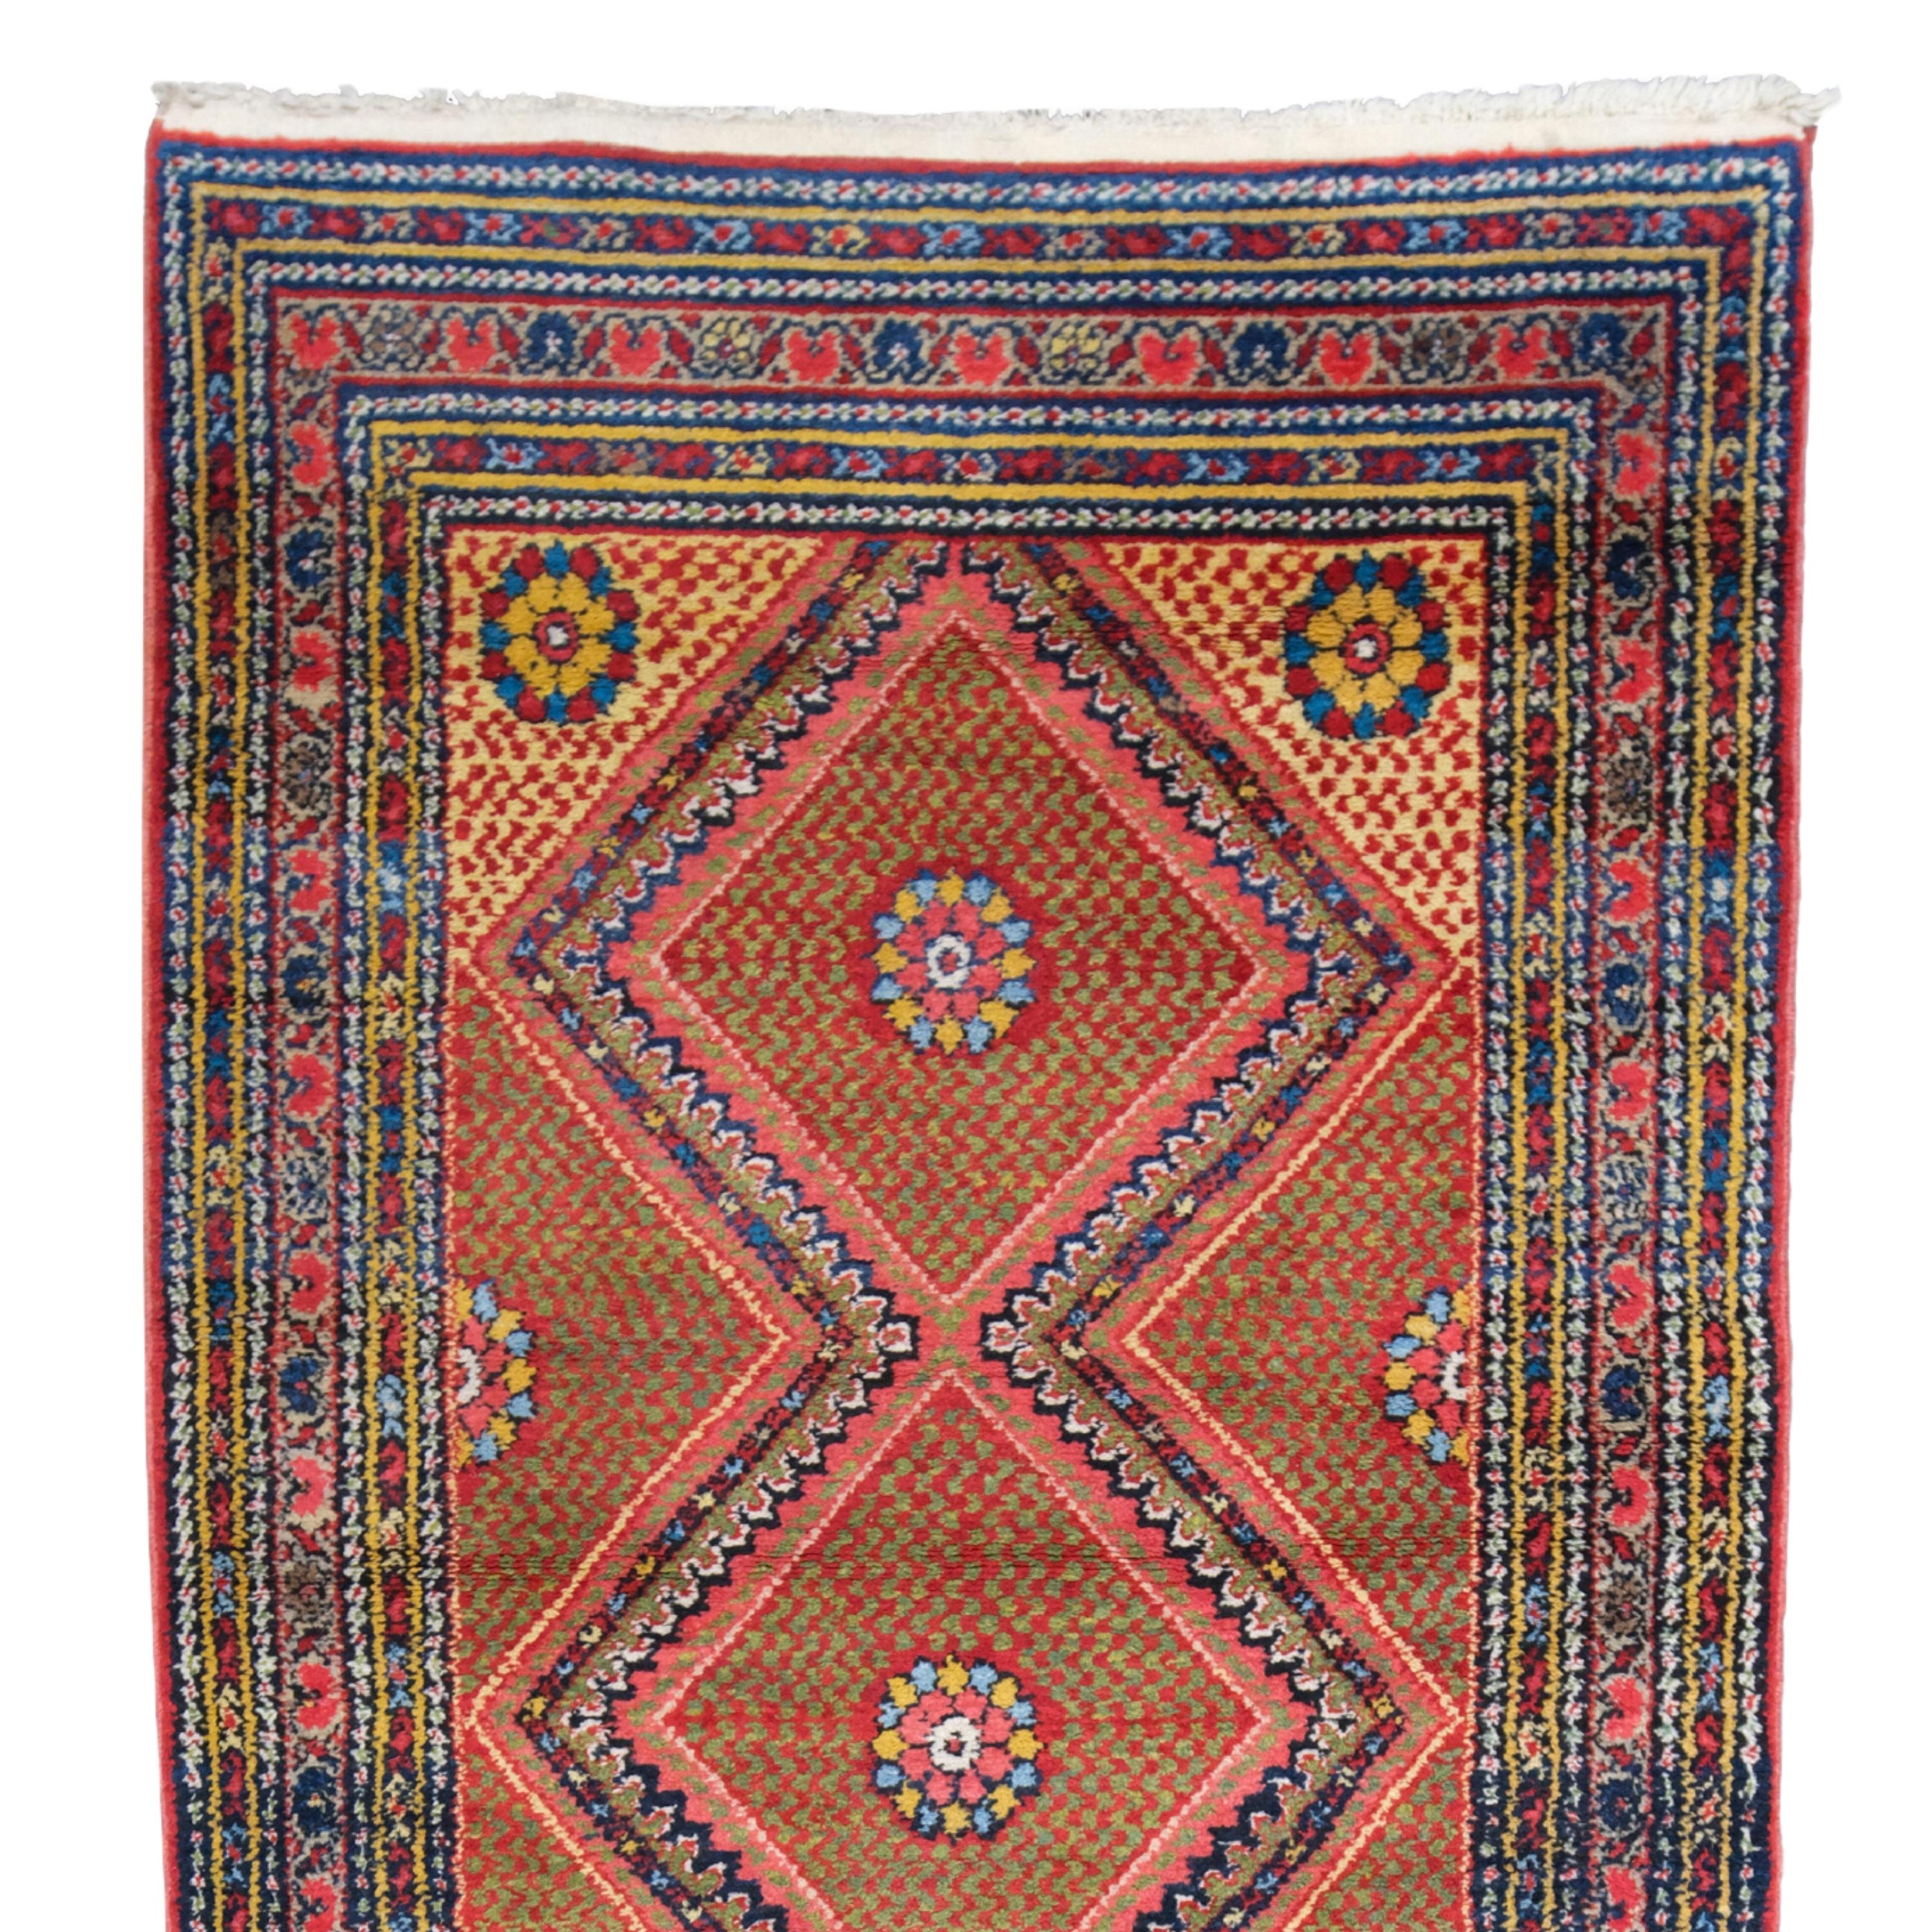 19th Century Malayer Runner
Size: 112x320 cm

This impressive 19th century Malayer Tapestry is a masterpiece reflecting the elegant and sophisticated craftsmanship of a historic period.

Rich Patterns: The carpet is decorated with intricate floral